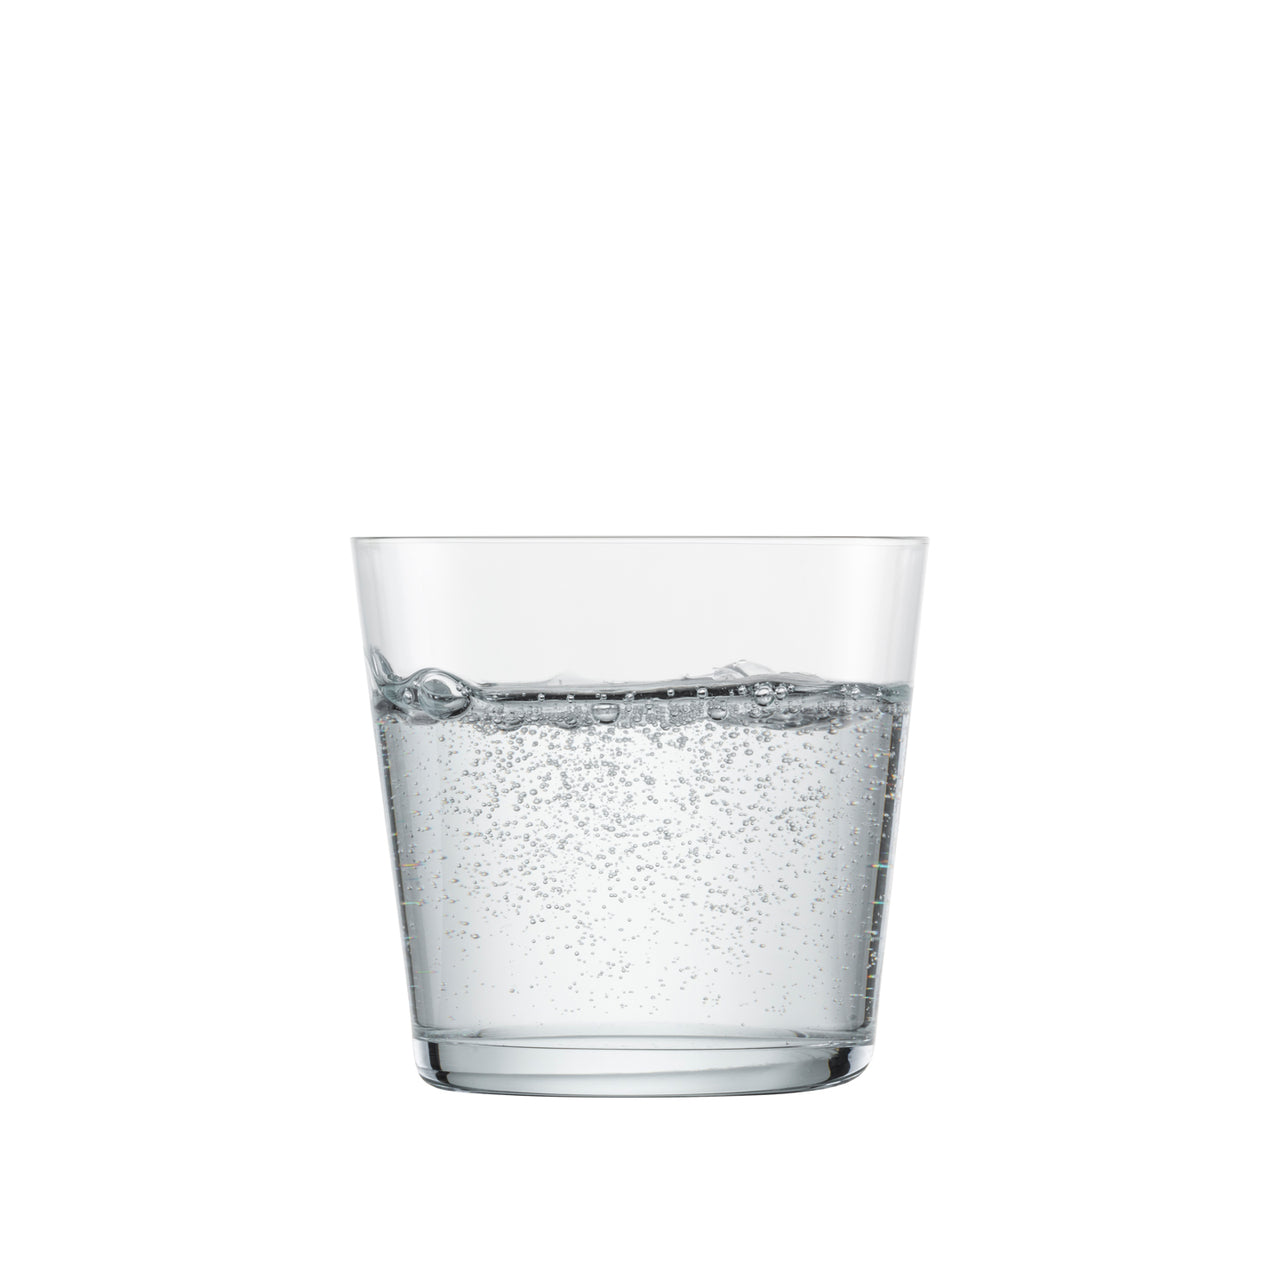 Zwiesel Together Water Glass Set of 4 / 367ml / Clear